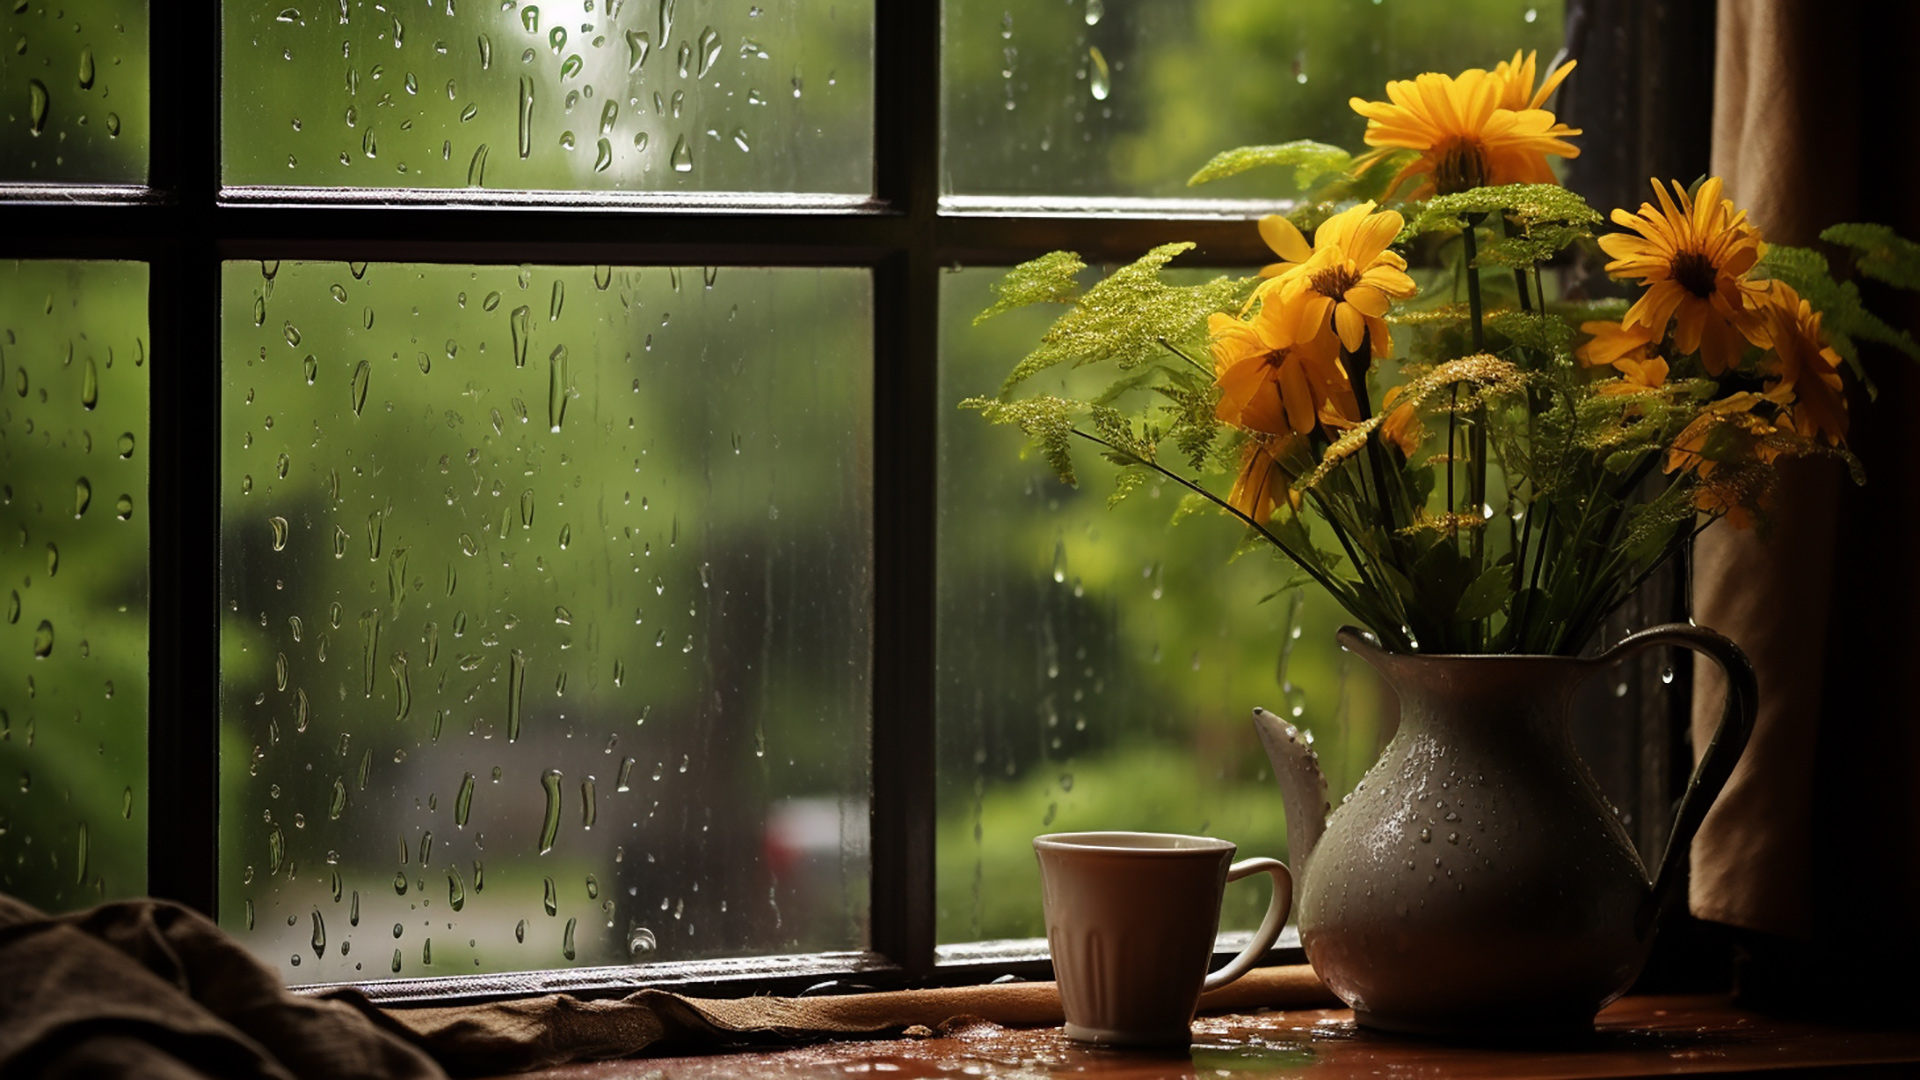 Therapeutic rainy window desktop wallpapers for mindfulness stock photo